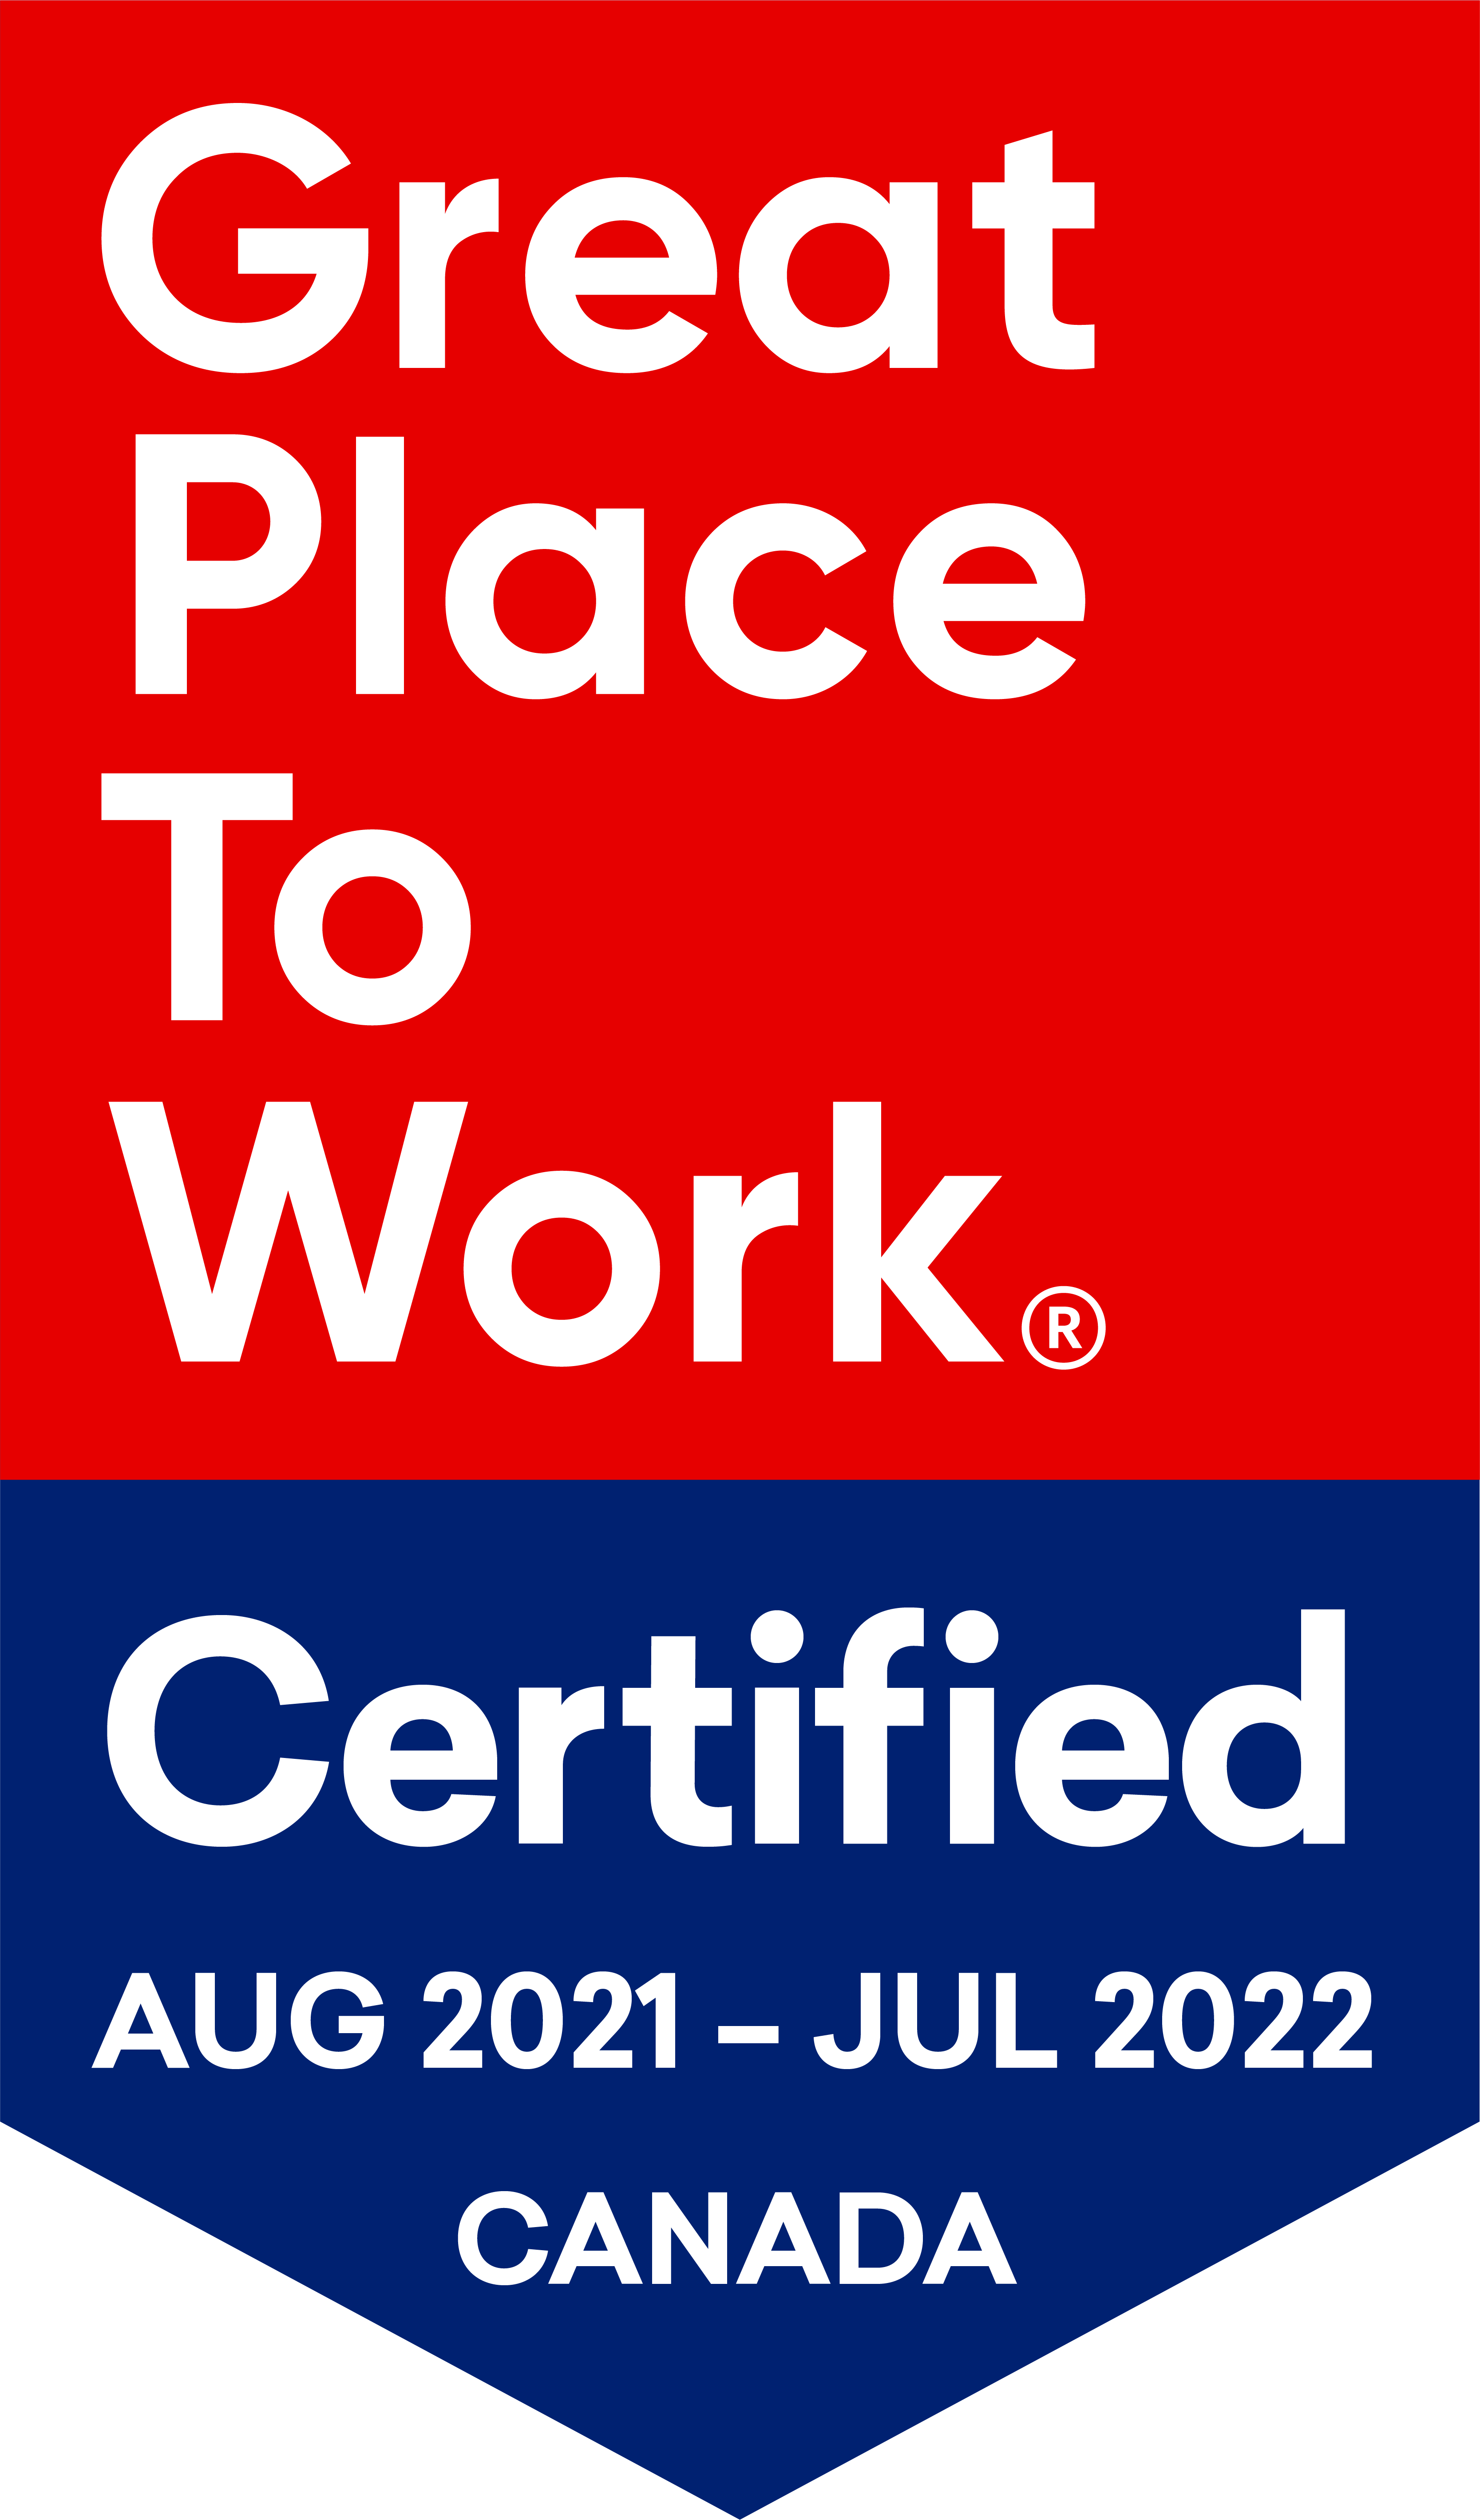 Great Place to Work Certificate - Aug 2021